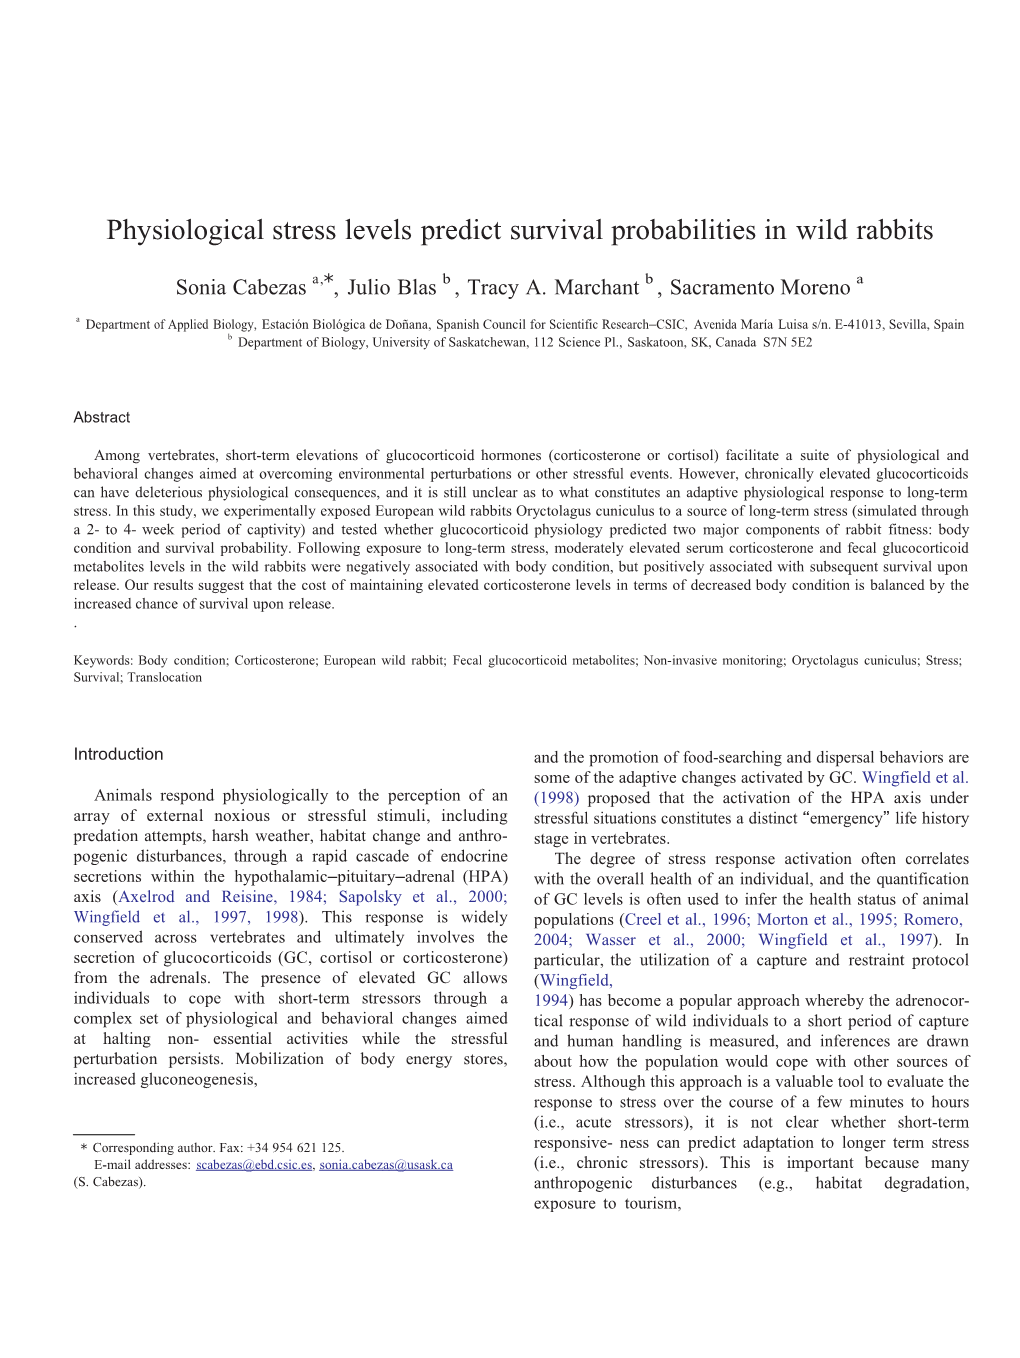 Physiological Stress Levels Predict Survival Probabilities in Wild Rabbits